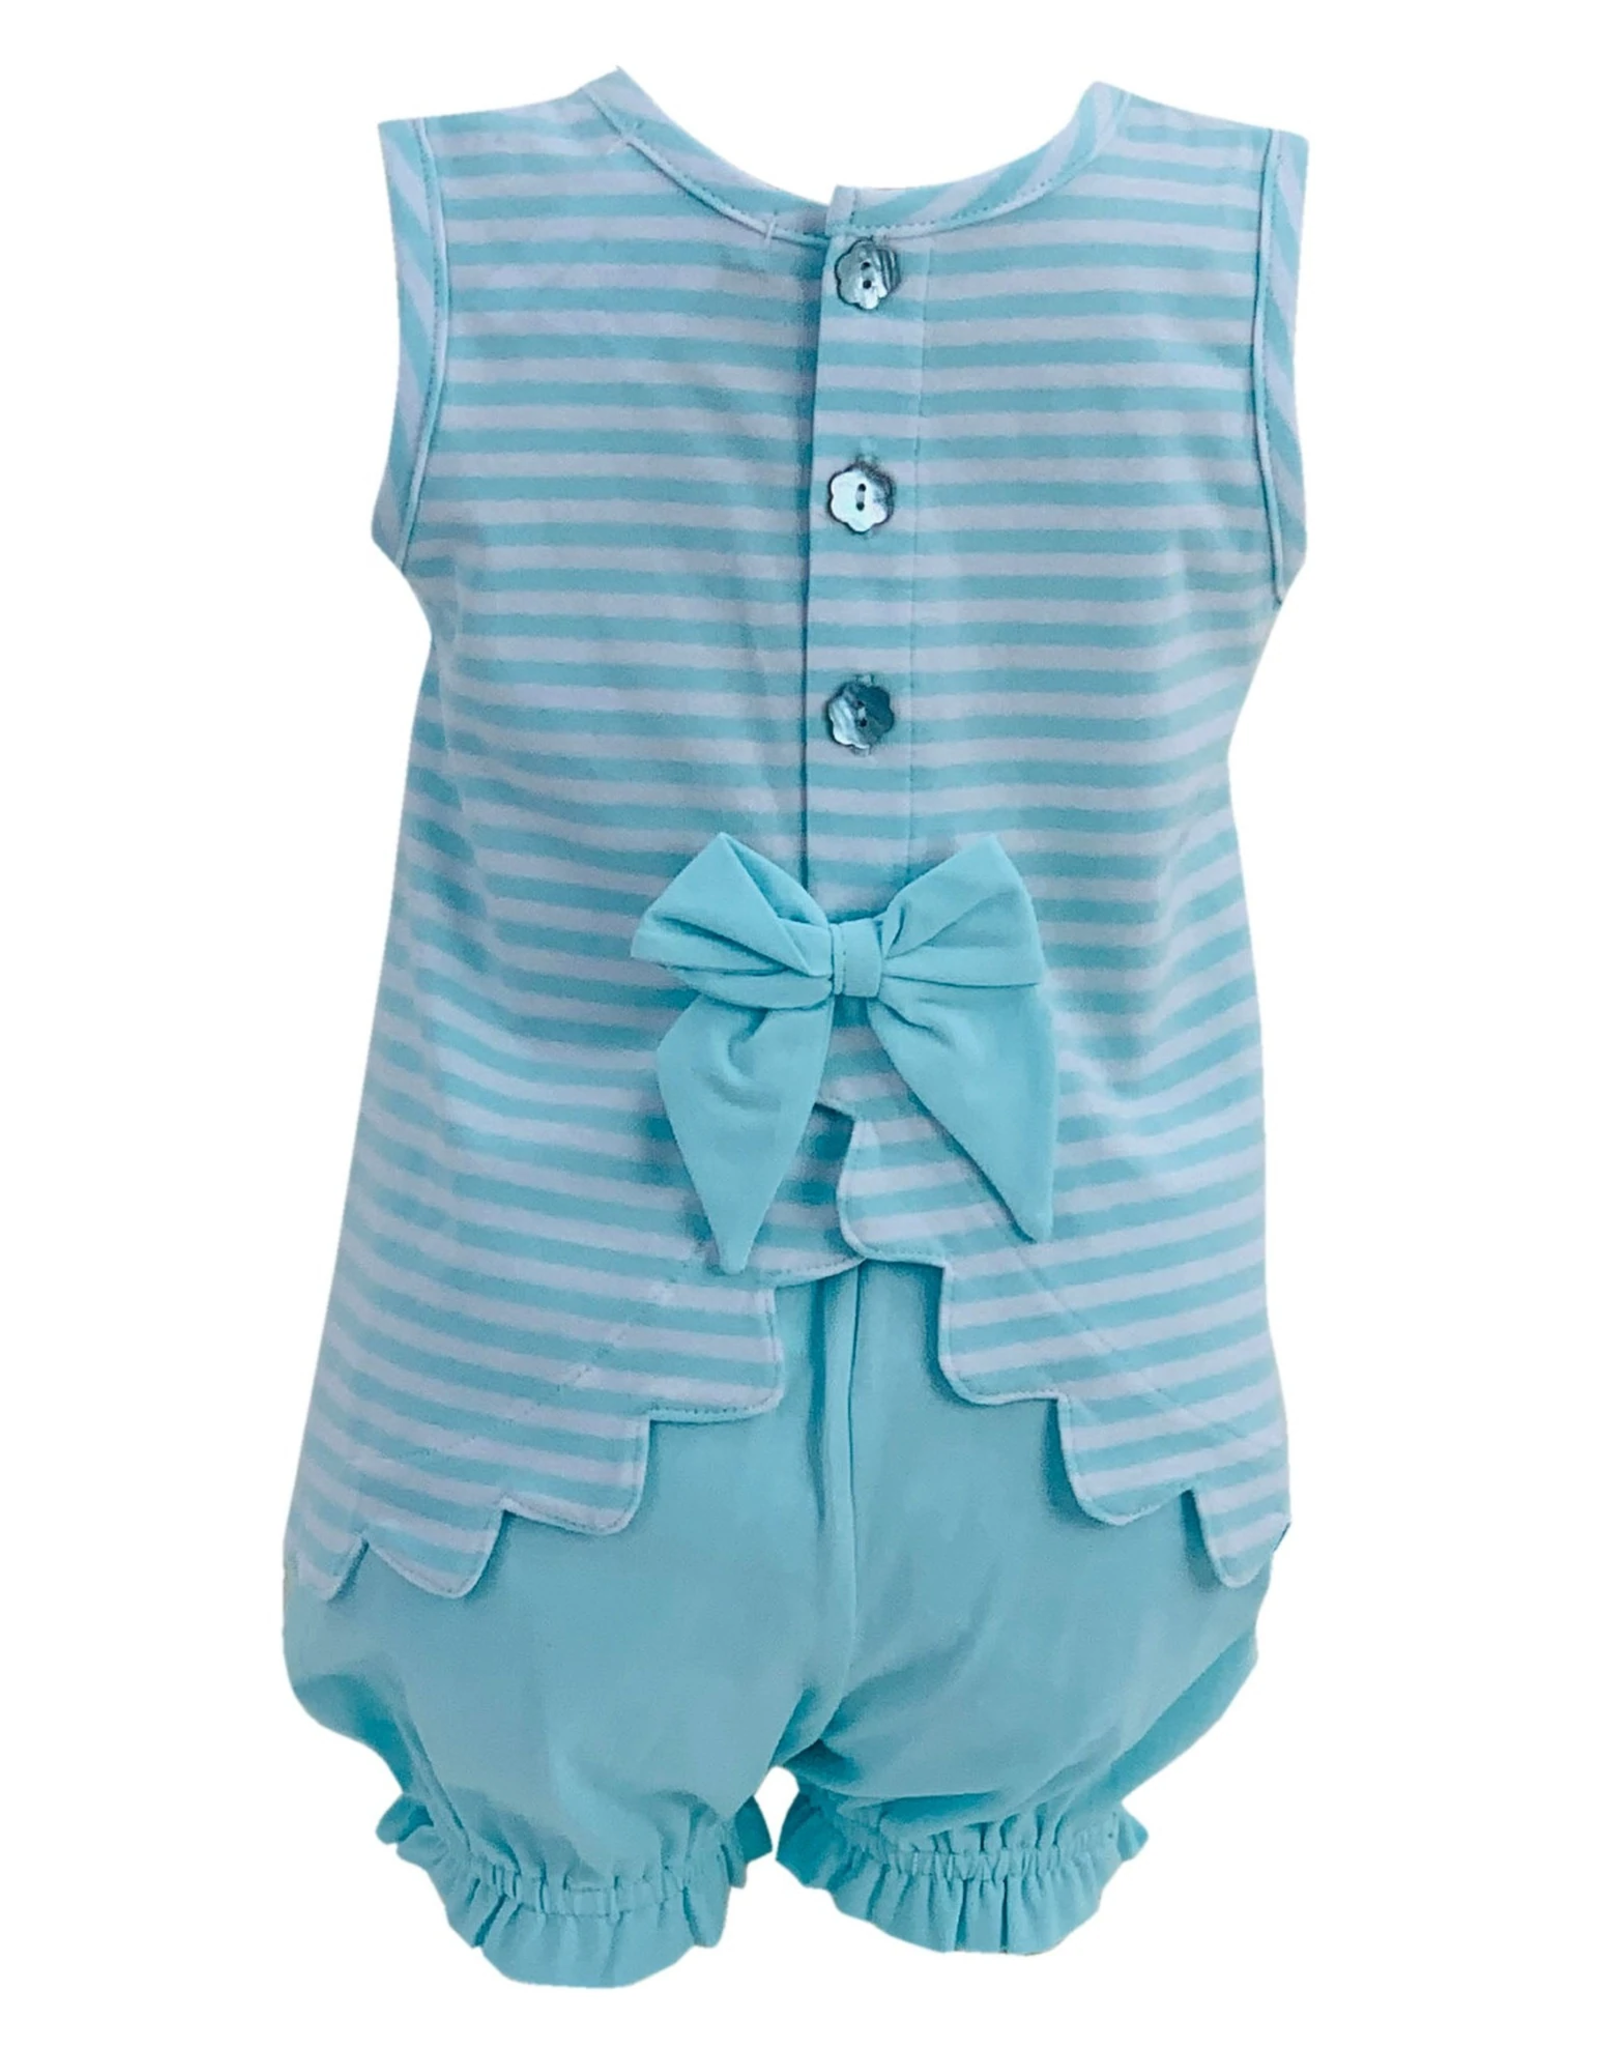 Daisy Mint Striped Applique Bloomers Set